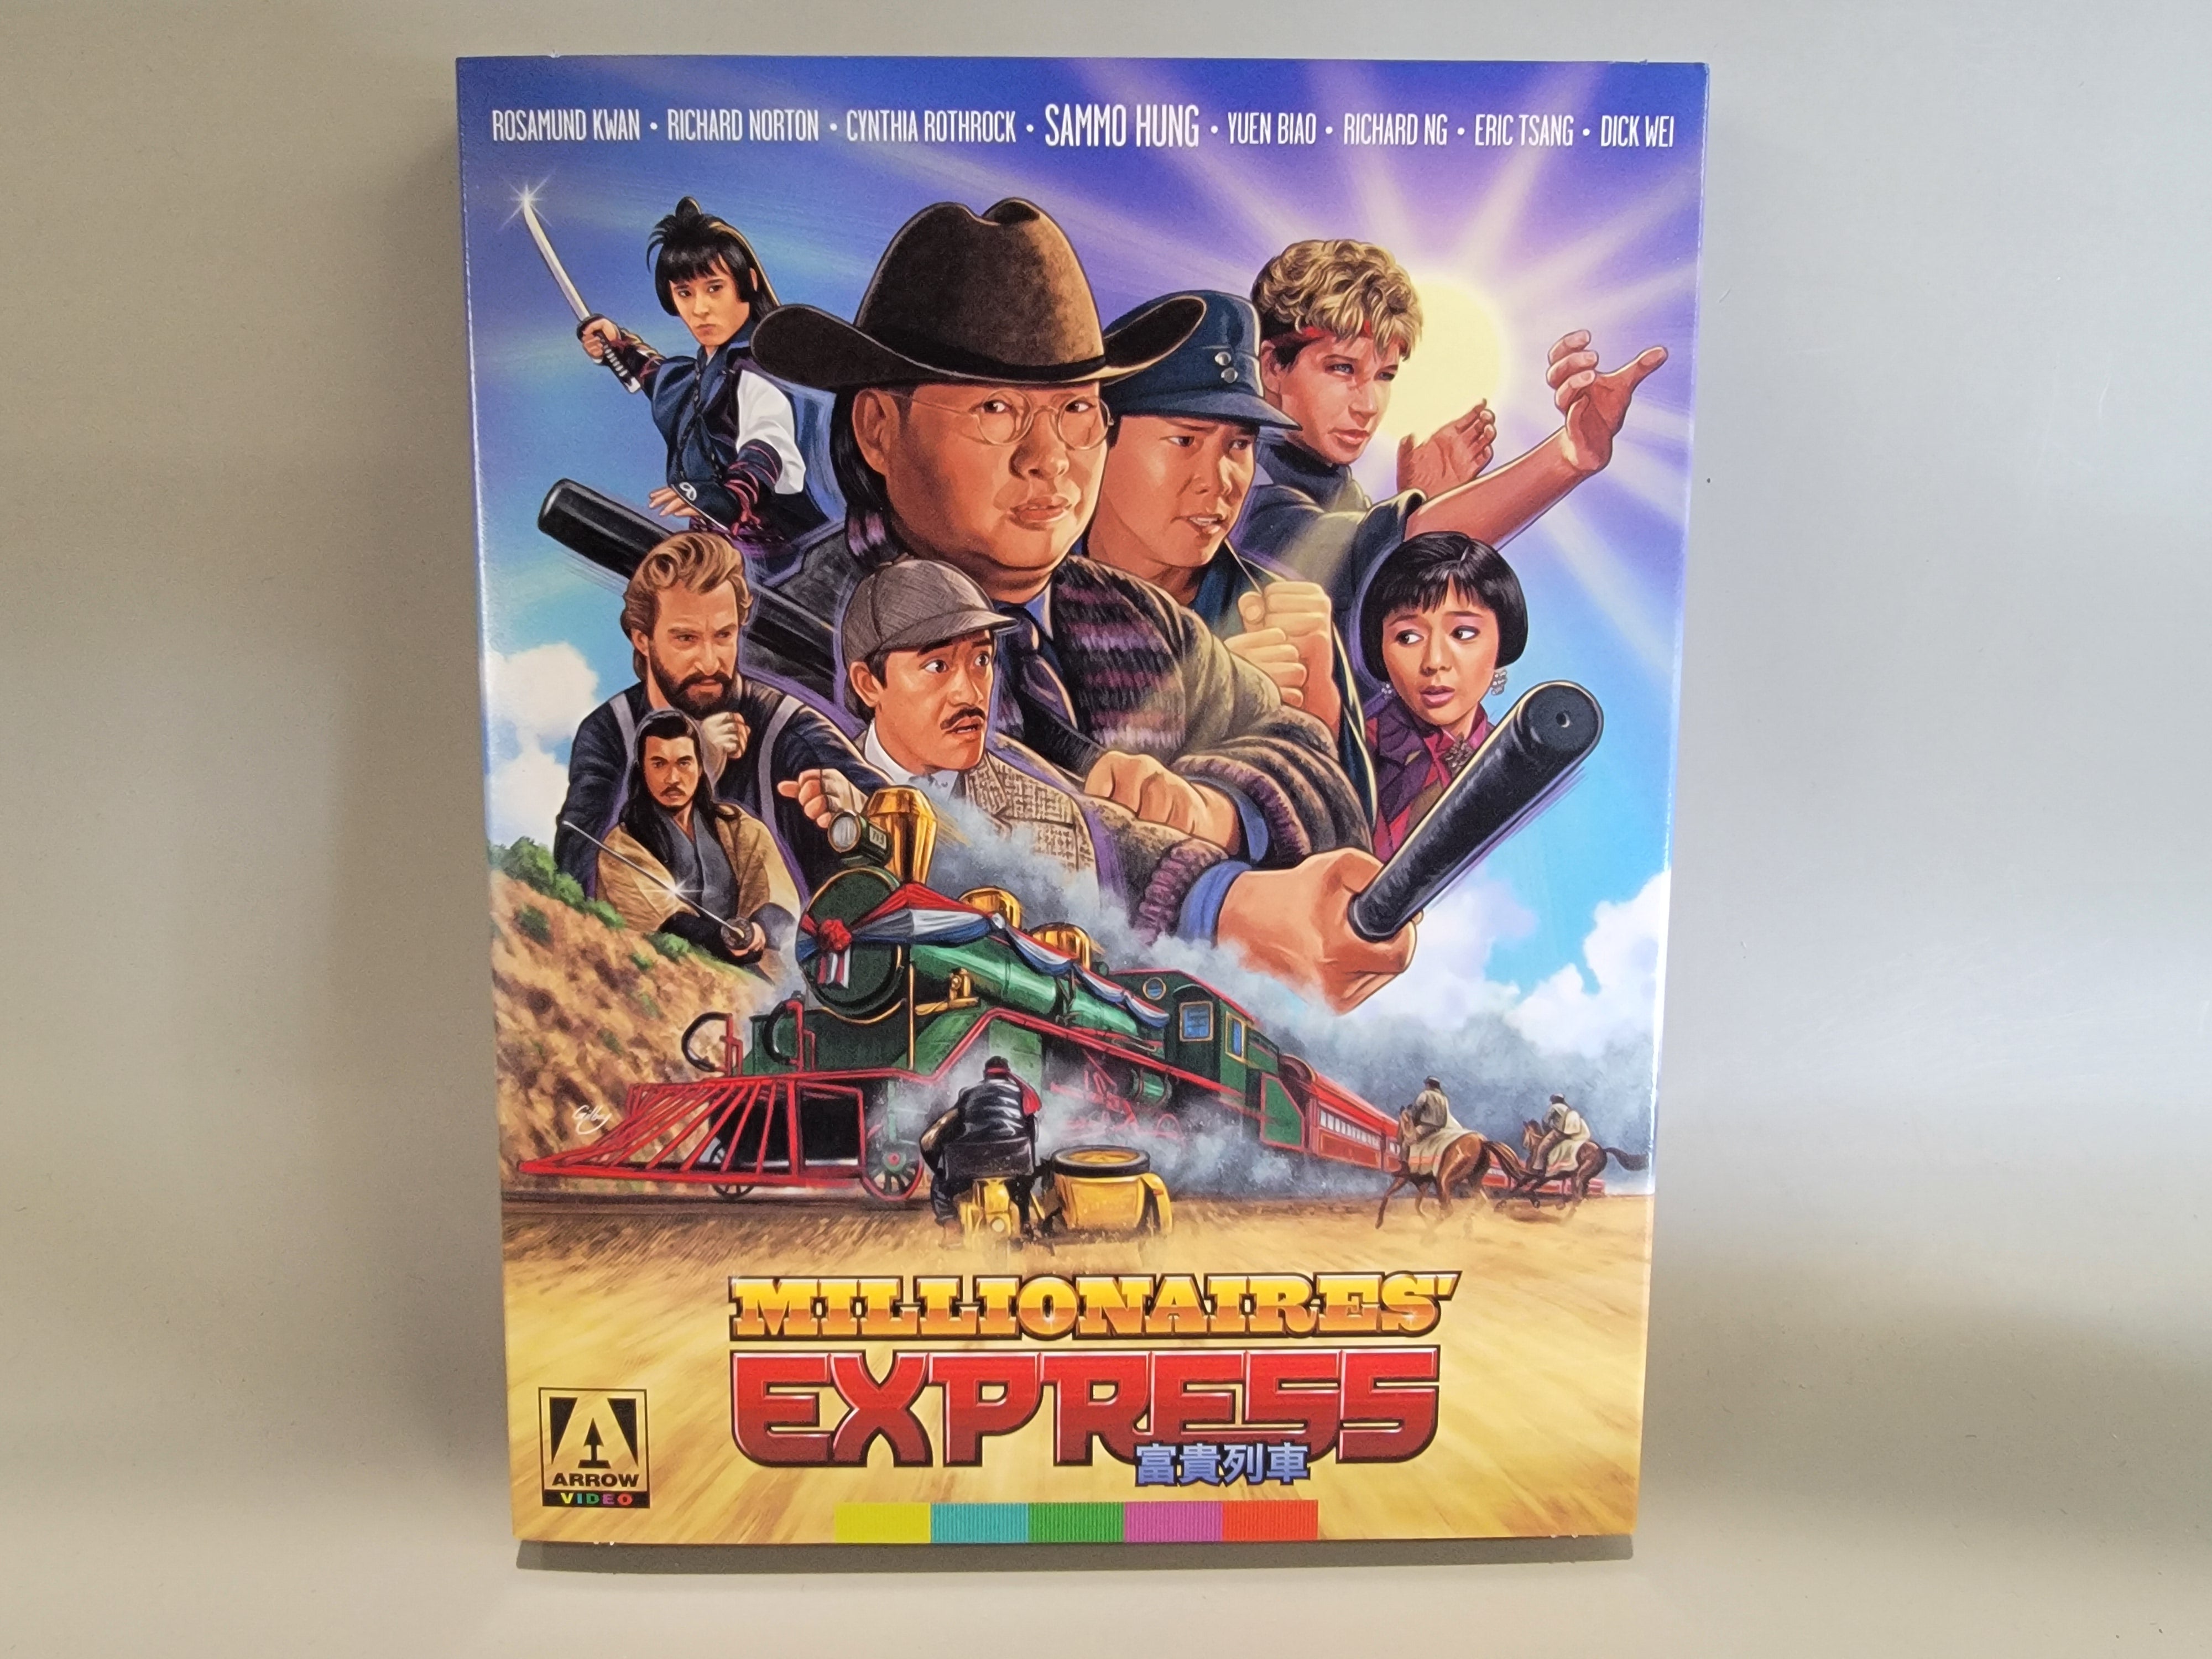 MILLIONAIRES' EXPRESS (LIMITED EDITION) BLU-RAY [USED]